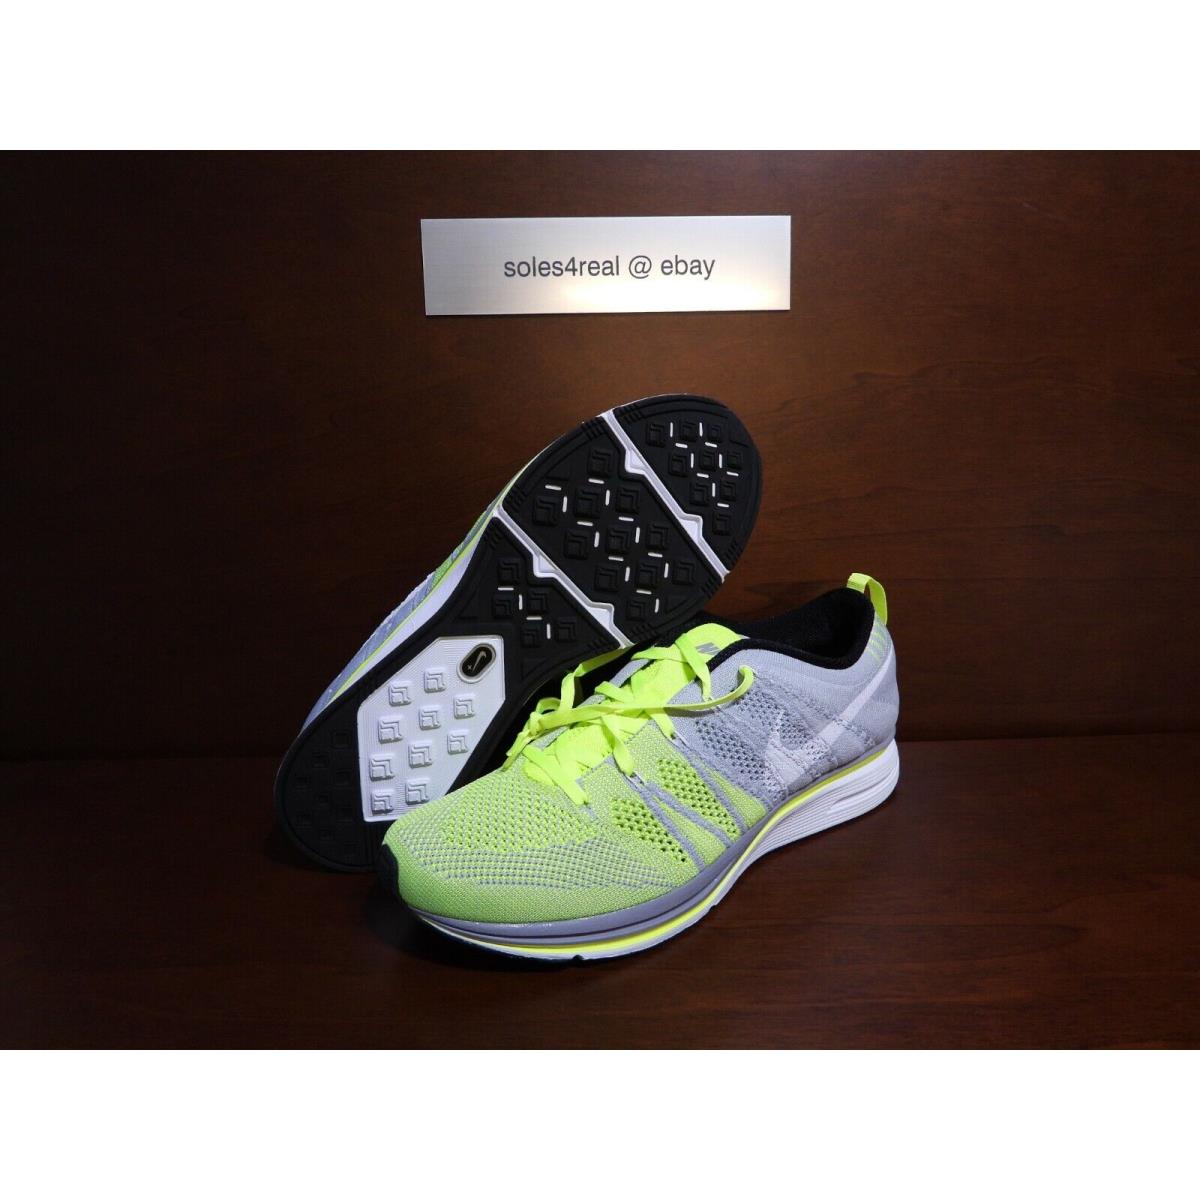 DS Nike Flyknit Trainer Size 9 FK Atmosphere Cool Grey Volt White